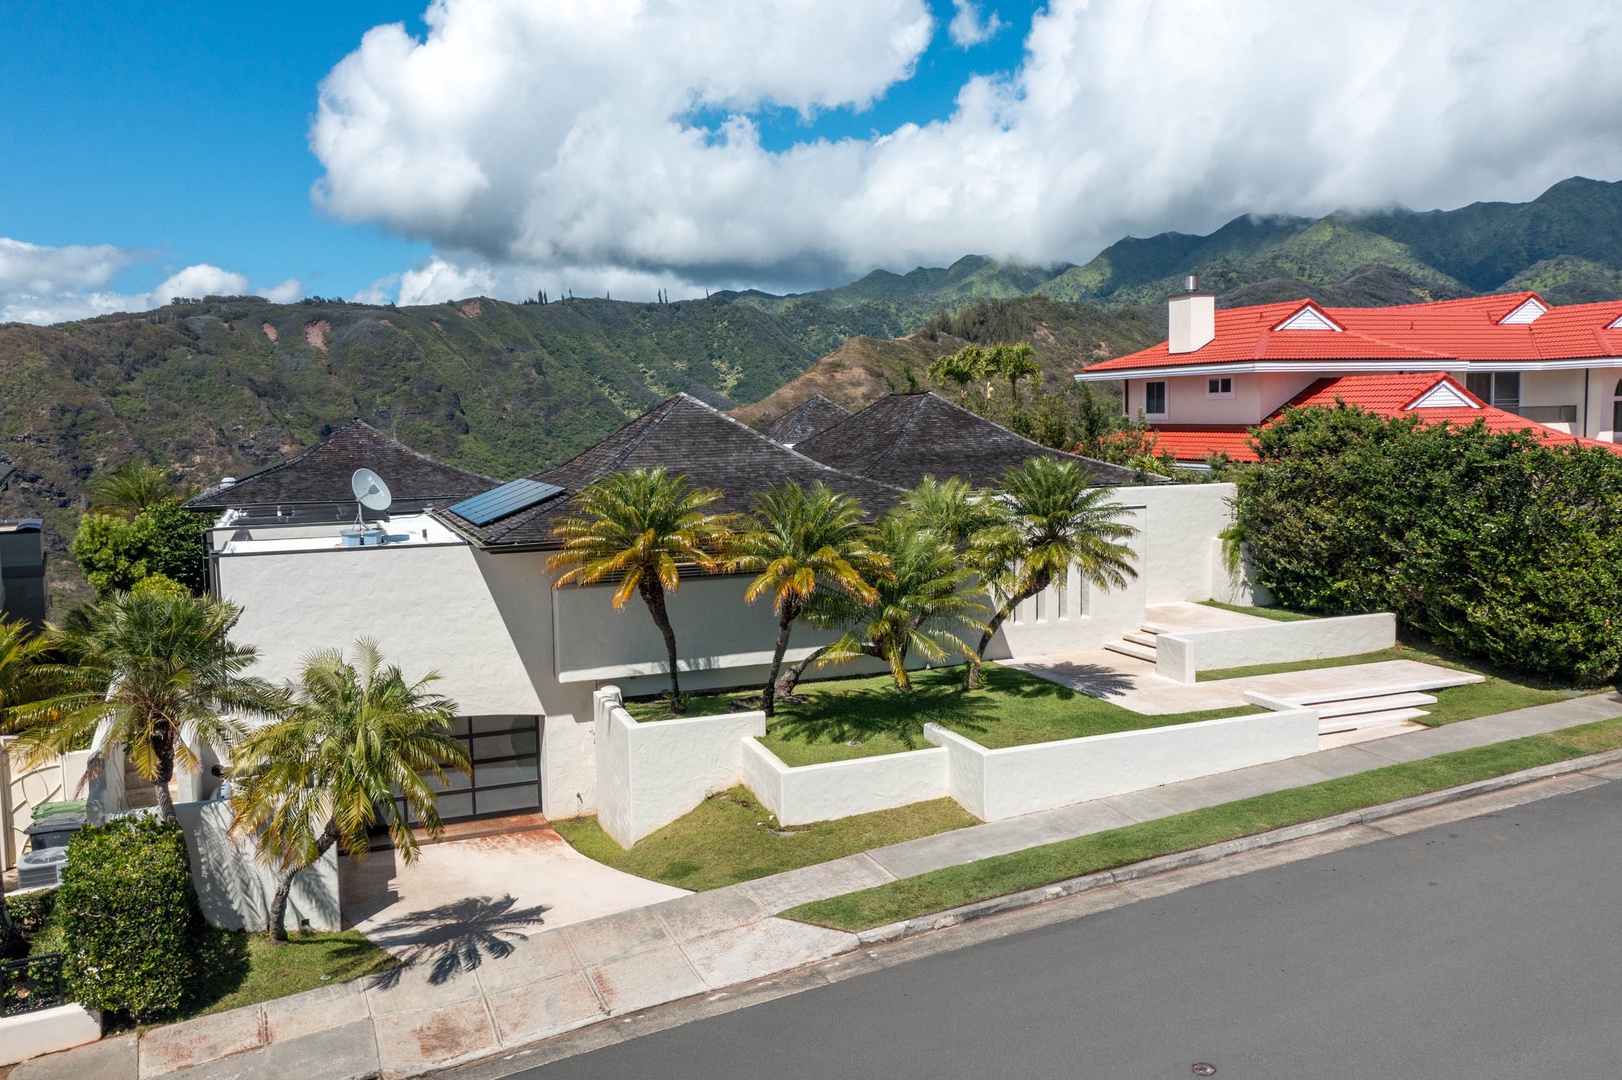 Honolulu Vacation Rentals, Sky Ridge House - Tropical Elegance: A Modern Home Nestled Amidst Palms and Mountains.